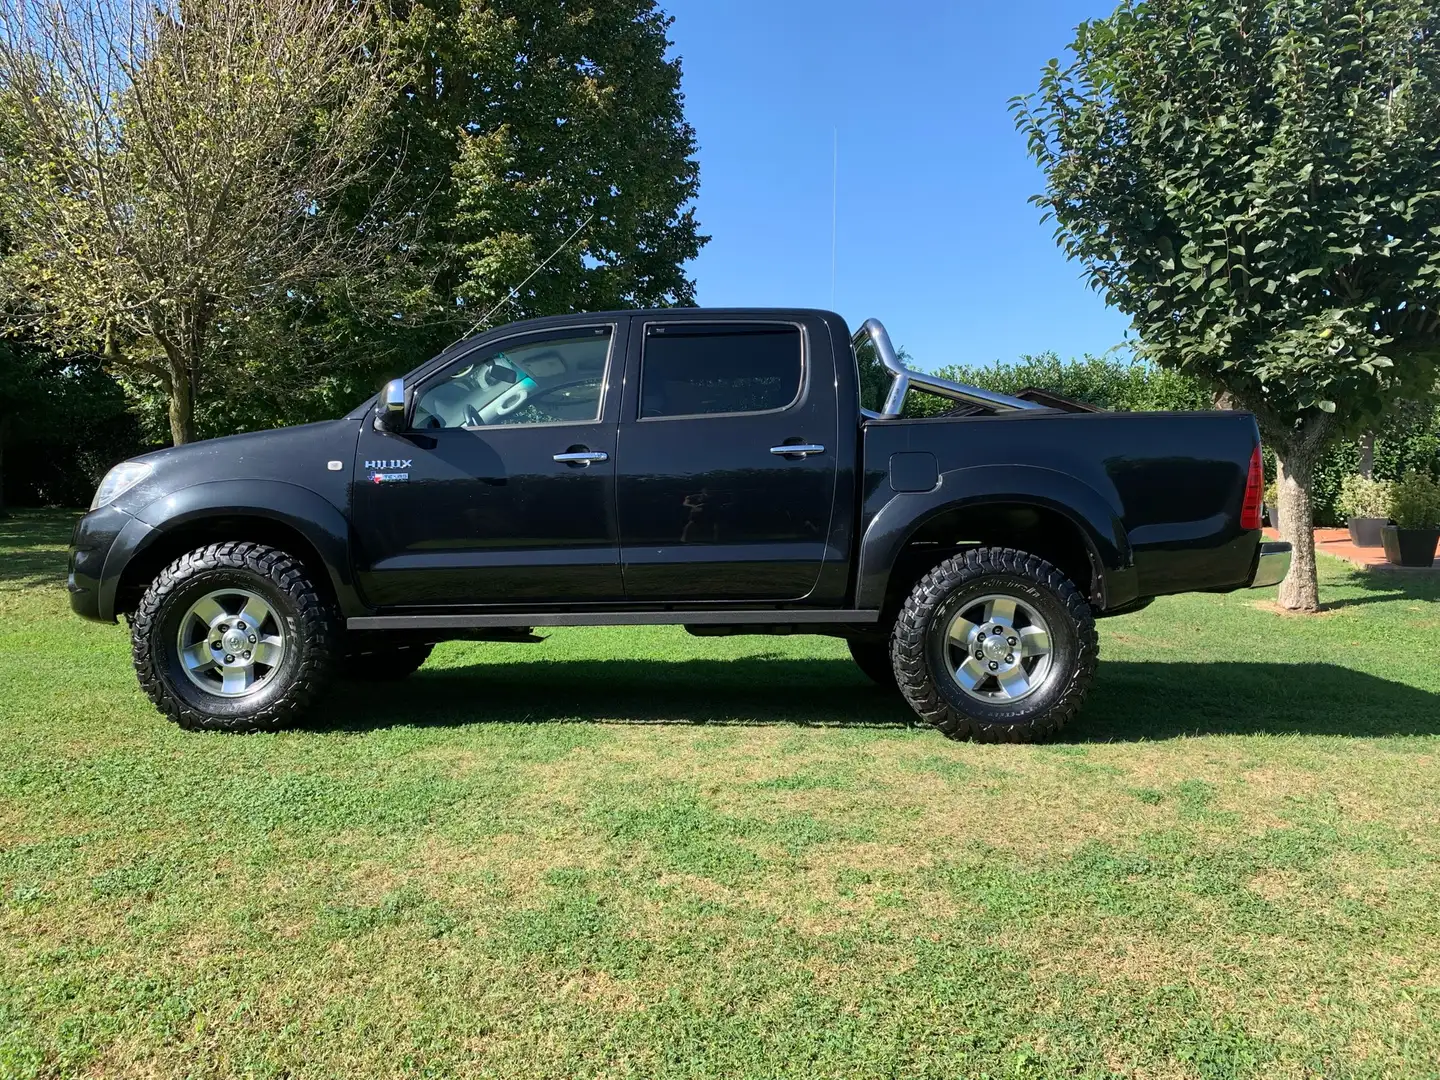 Toyota Hilux 3.0 double cab SR+ my11 Fekete - 2